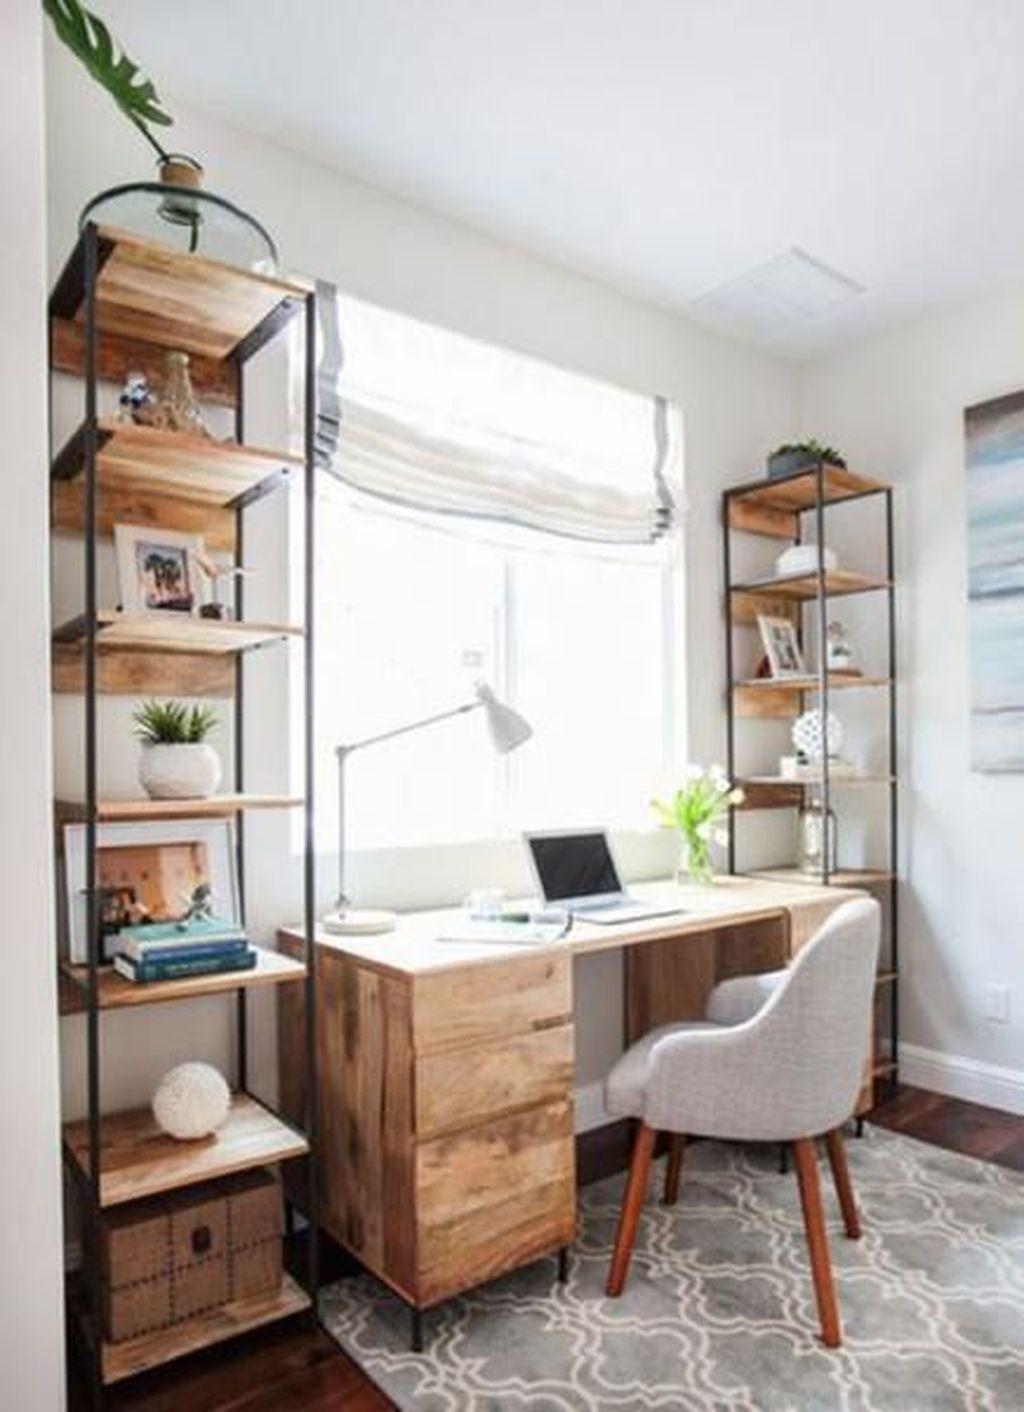 Small Home Office Design Ideas - 40+ Inspiring Small Home Office Ideas ...